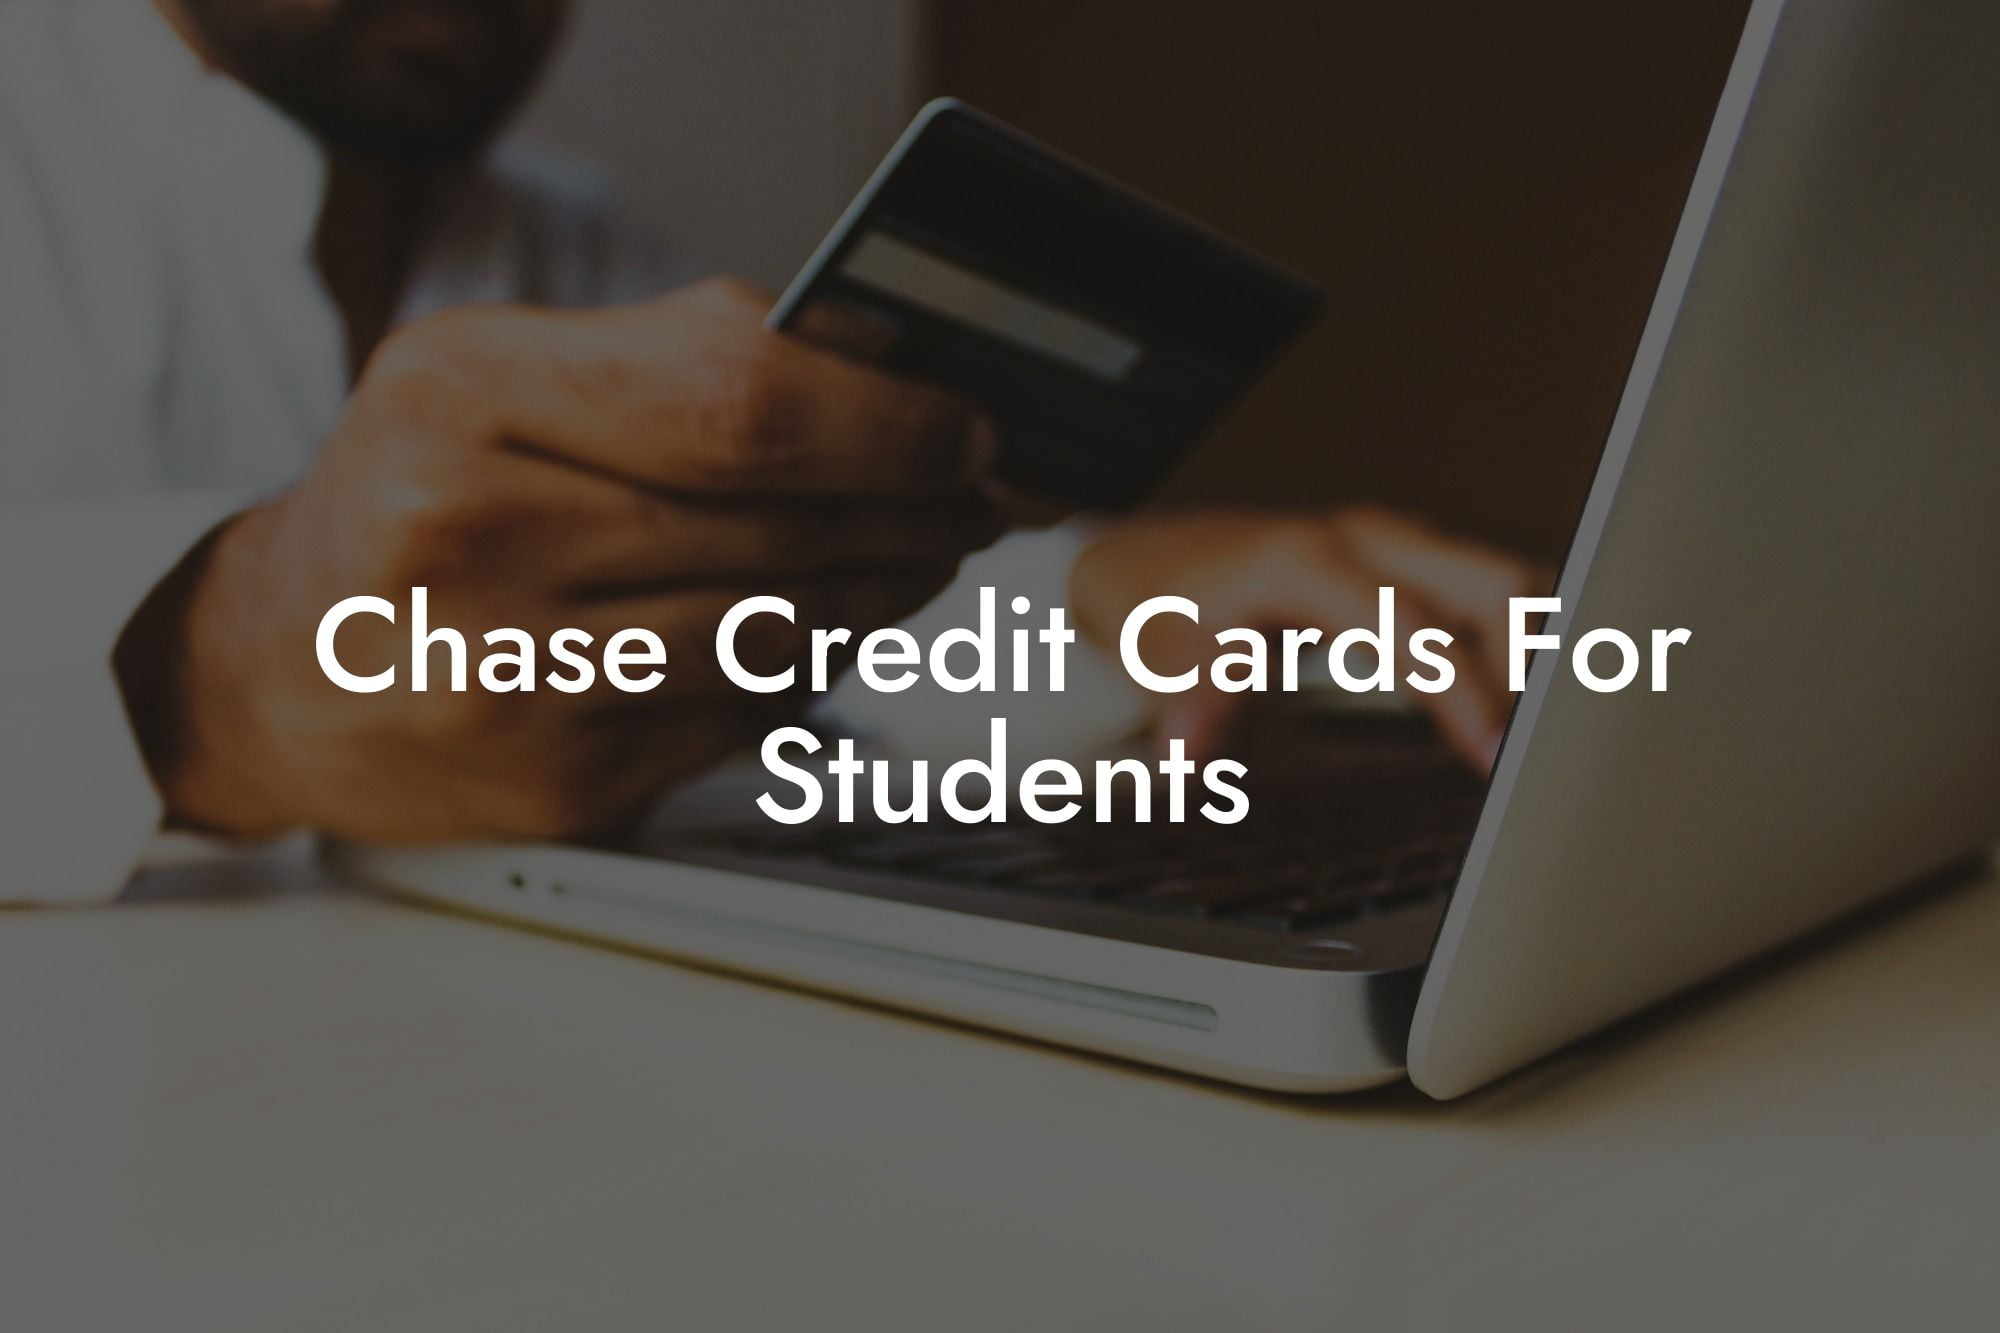 Chase Credit Cards For Students